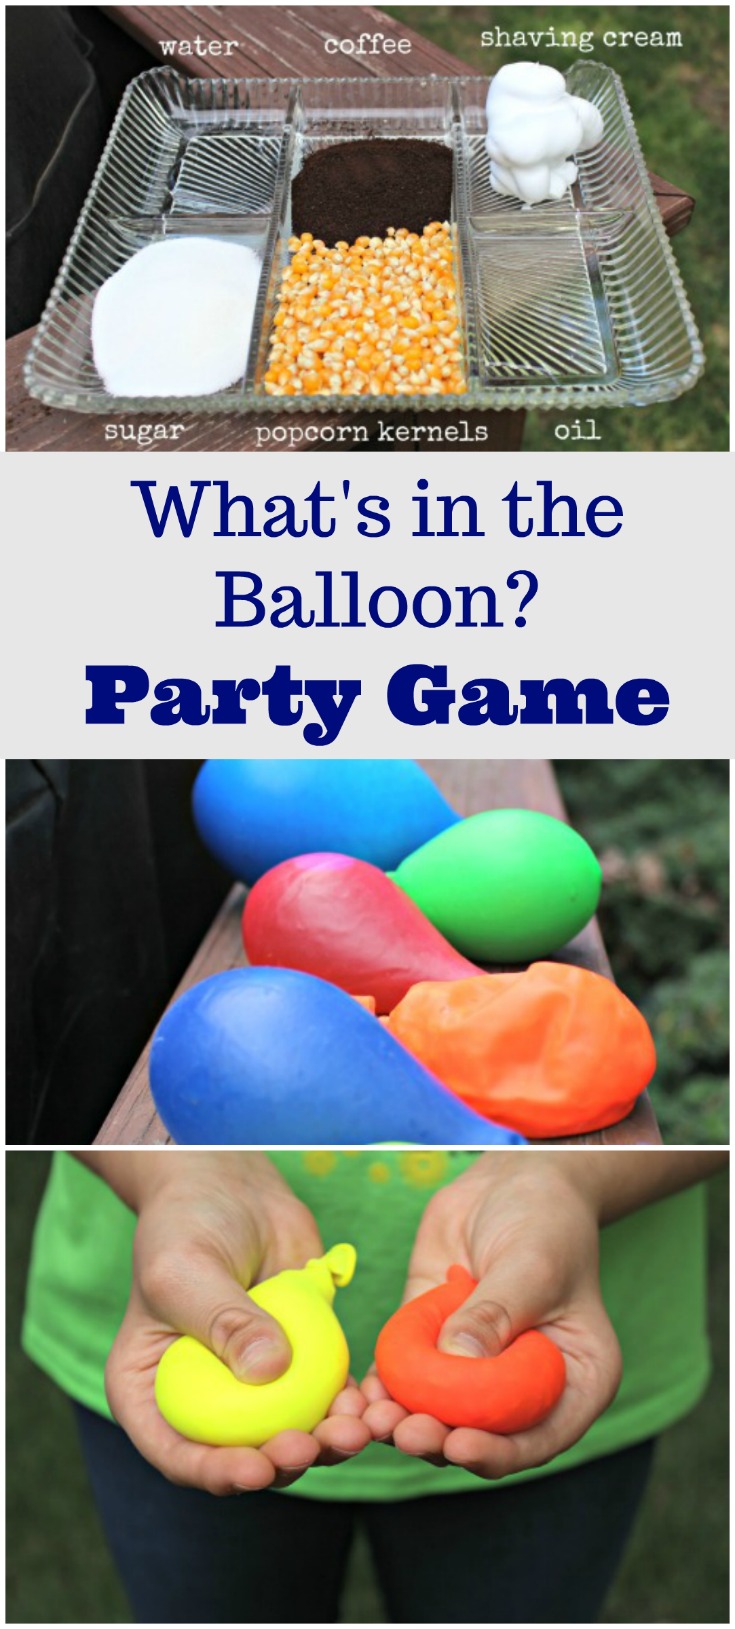 Fun Party Games: Guess What's in the Balloon - Edventures ...